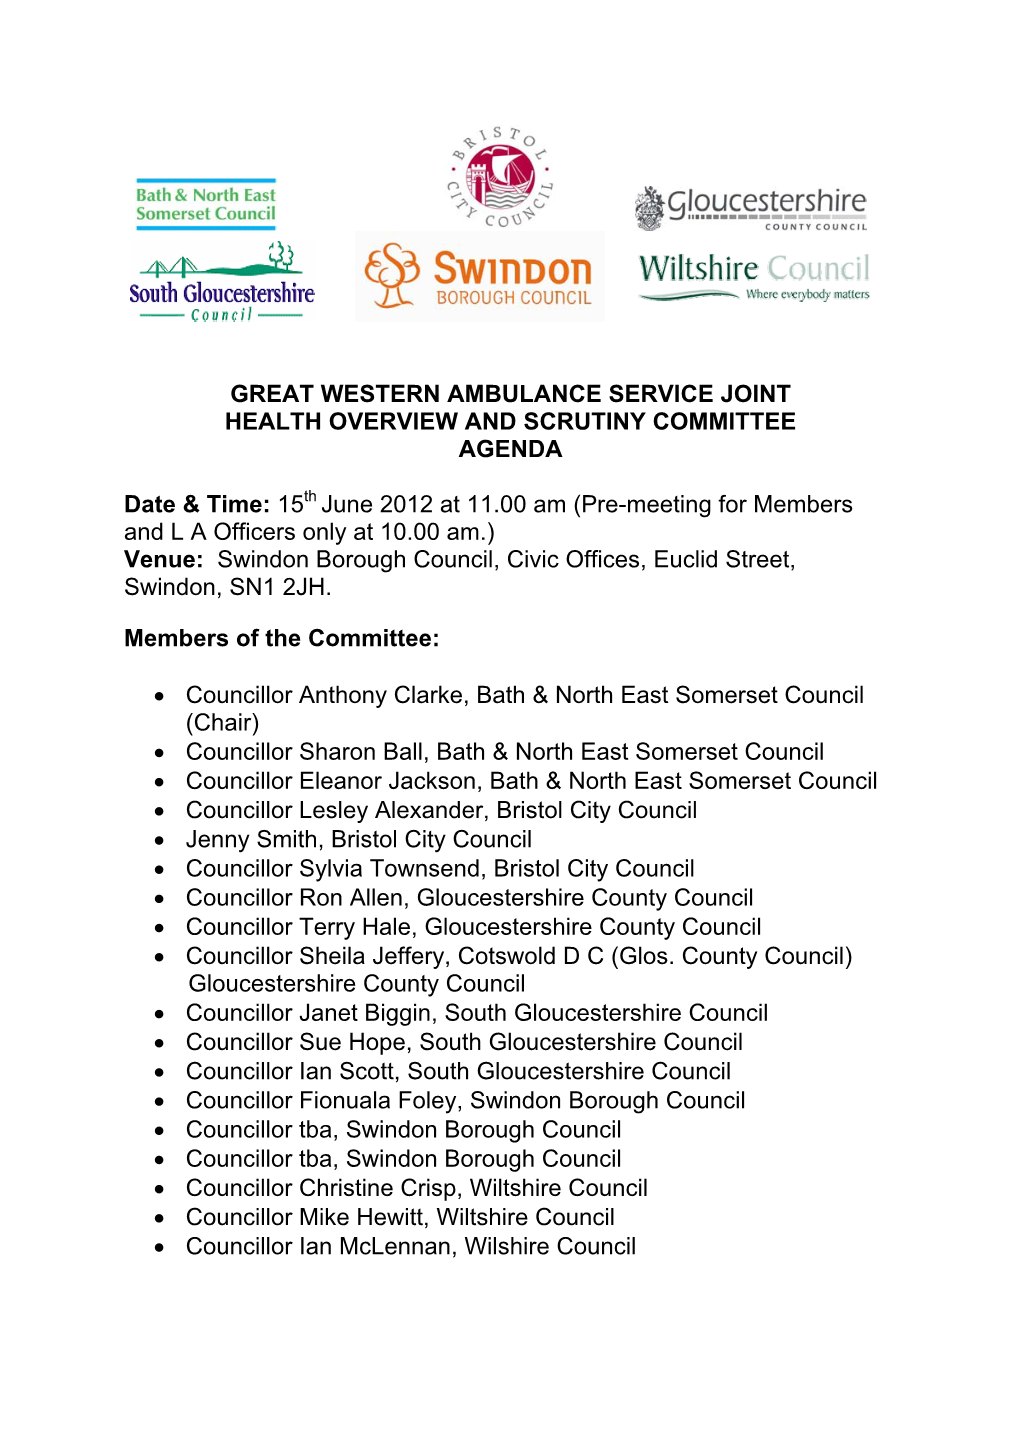 Great Western Ambulance Service Joint Health Overview and Scrutiny Committee Agenda